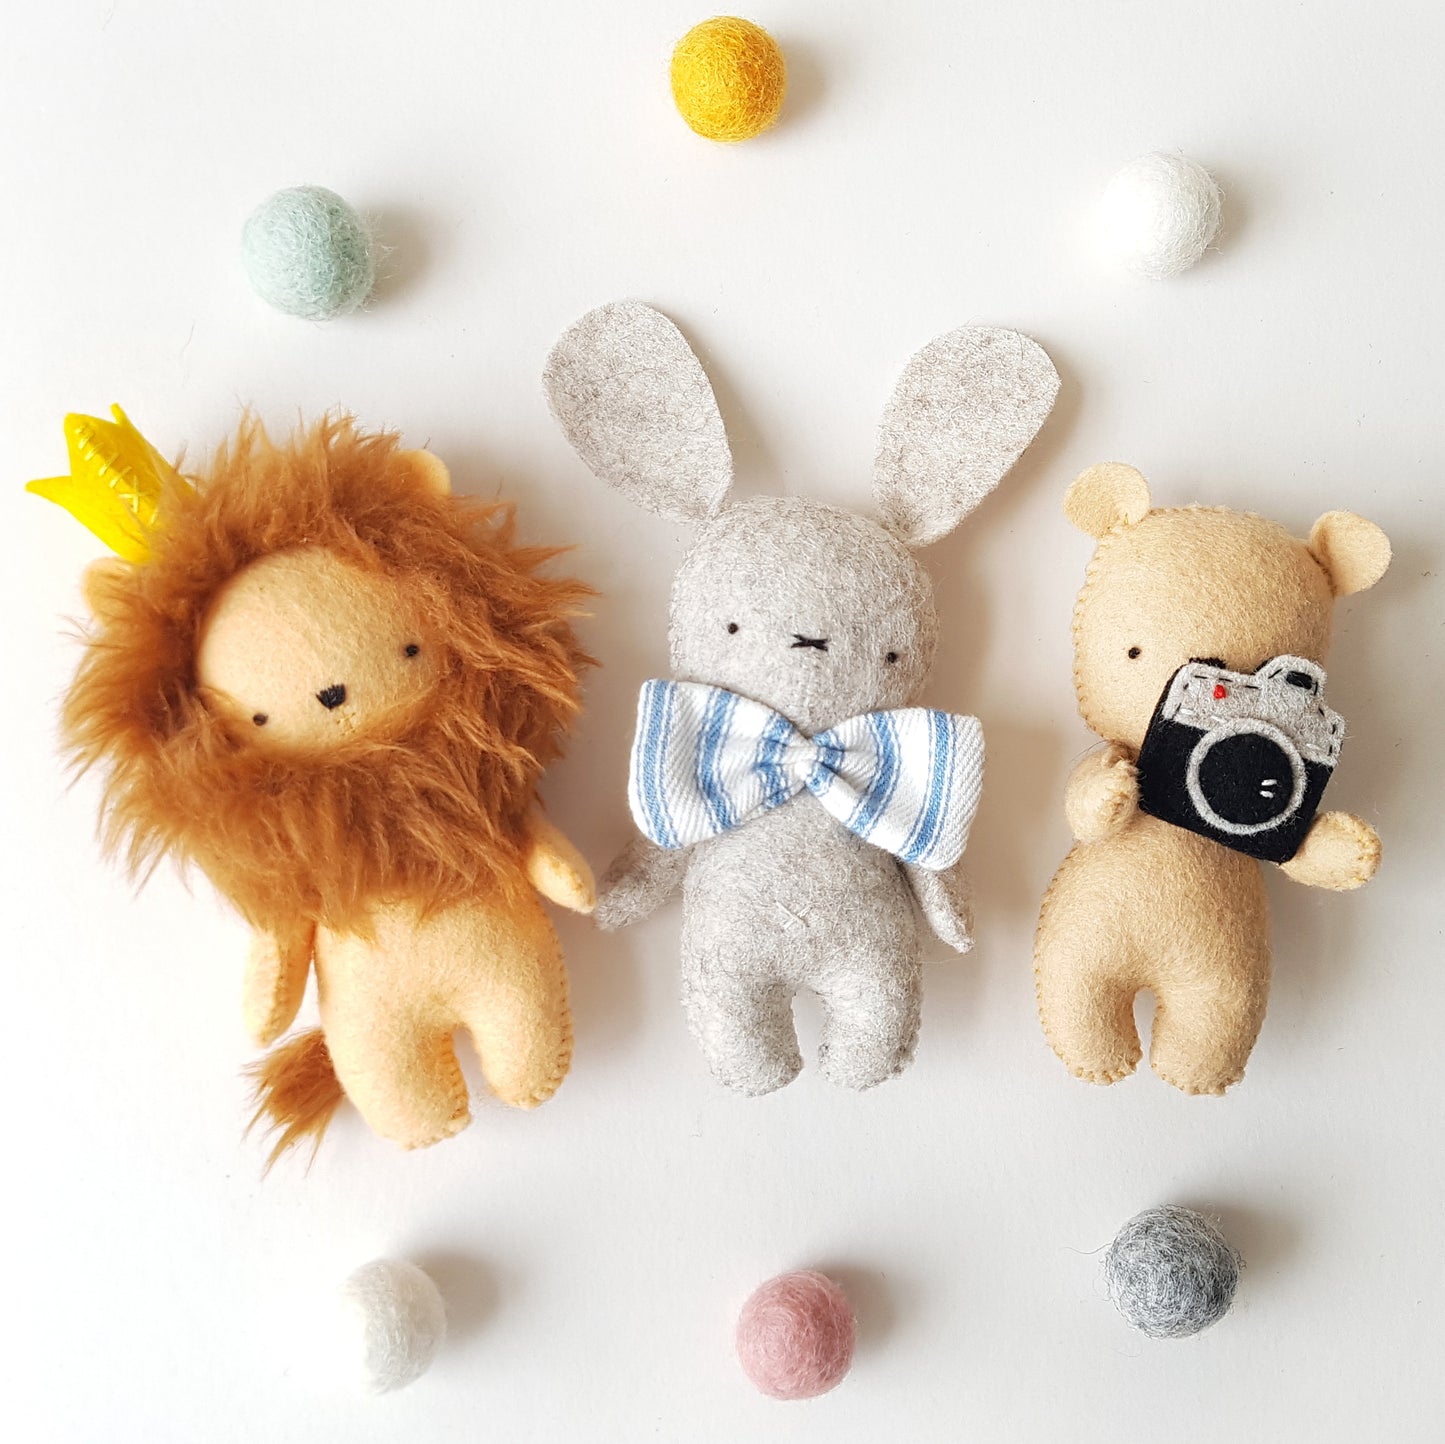 Bunny, Bear and Lion PDF Pattern + Sewing tutorial